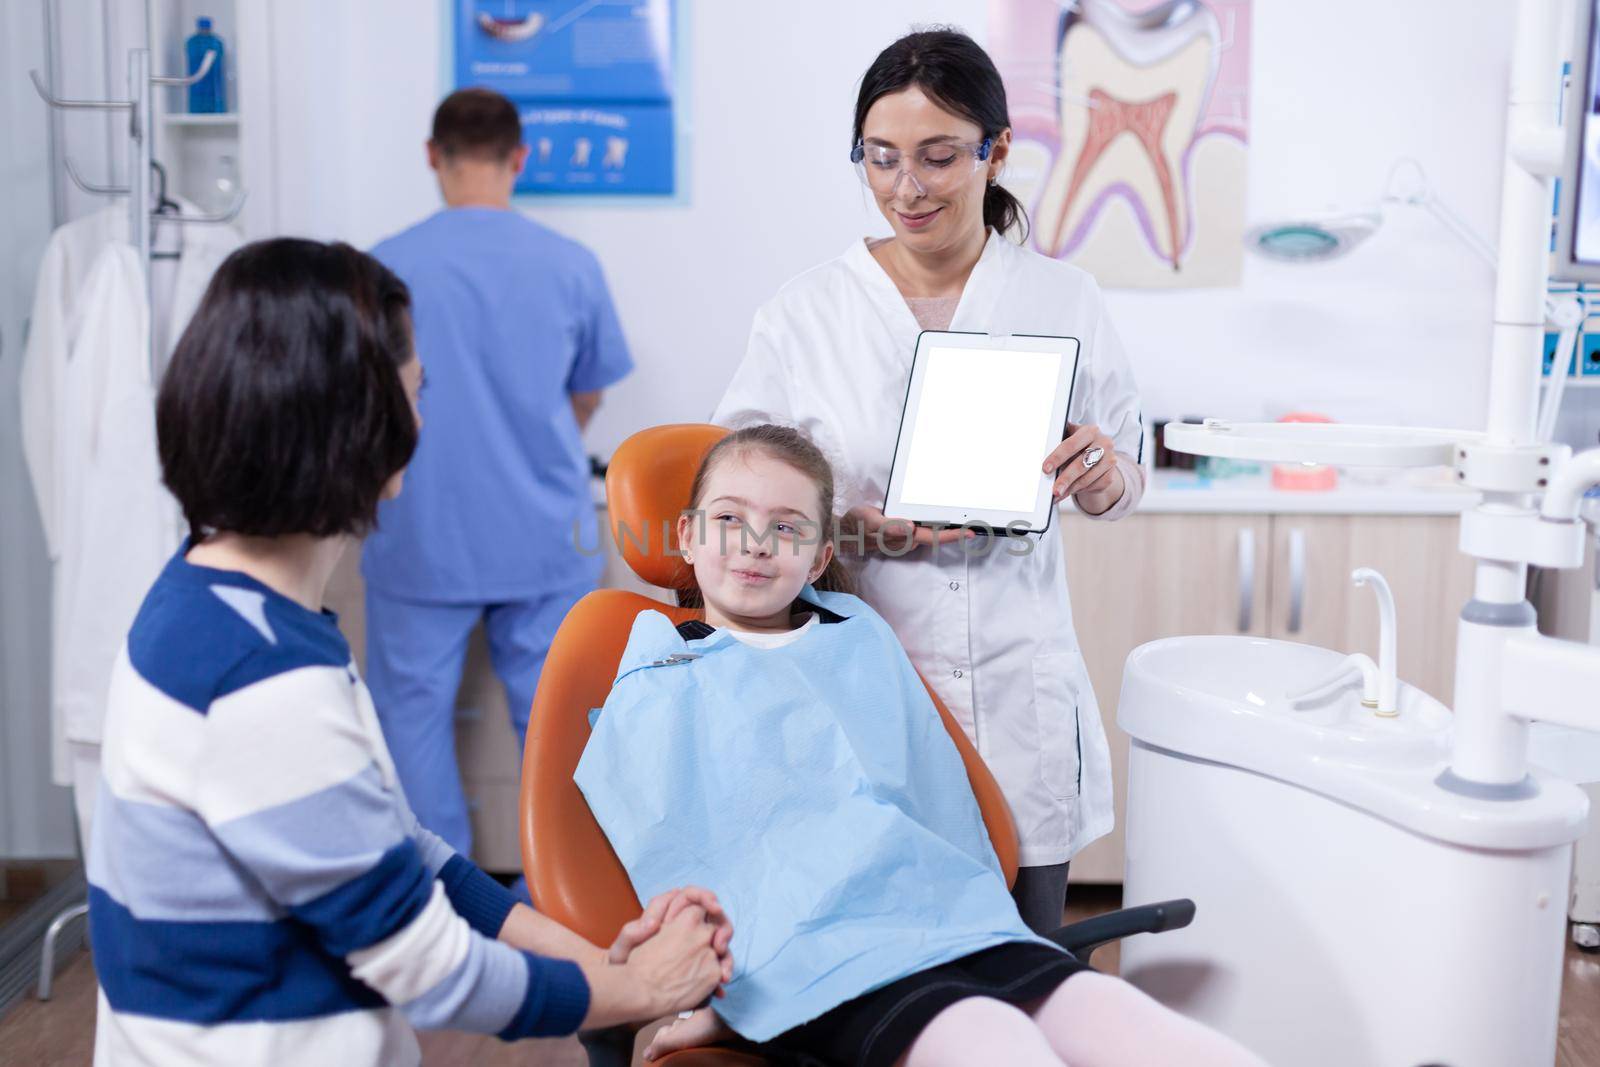 Kid wearing dental bib and doctor discussing with parent by DCStudio